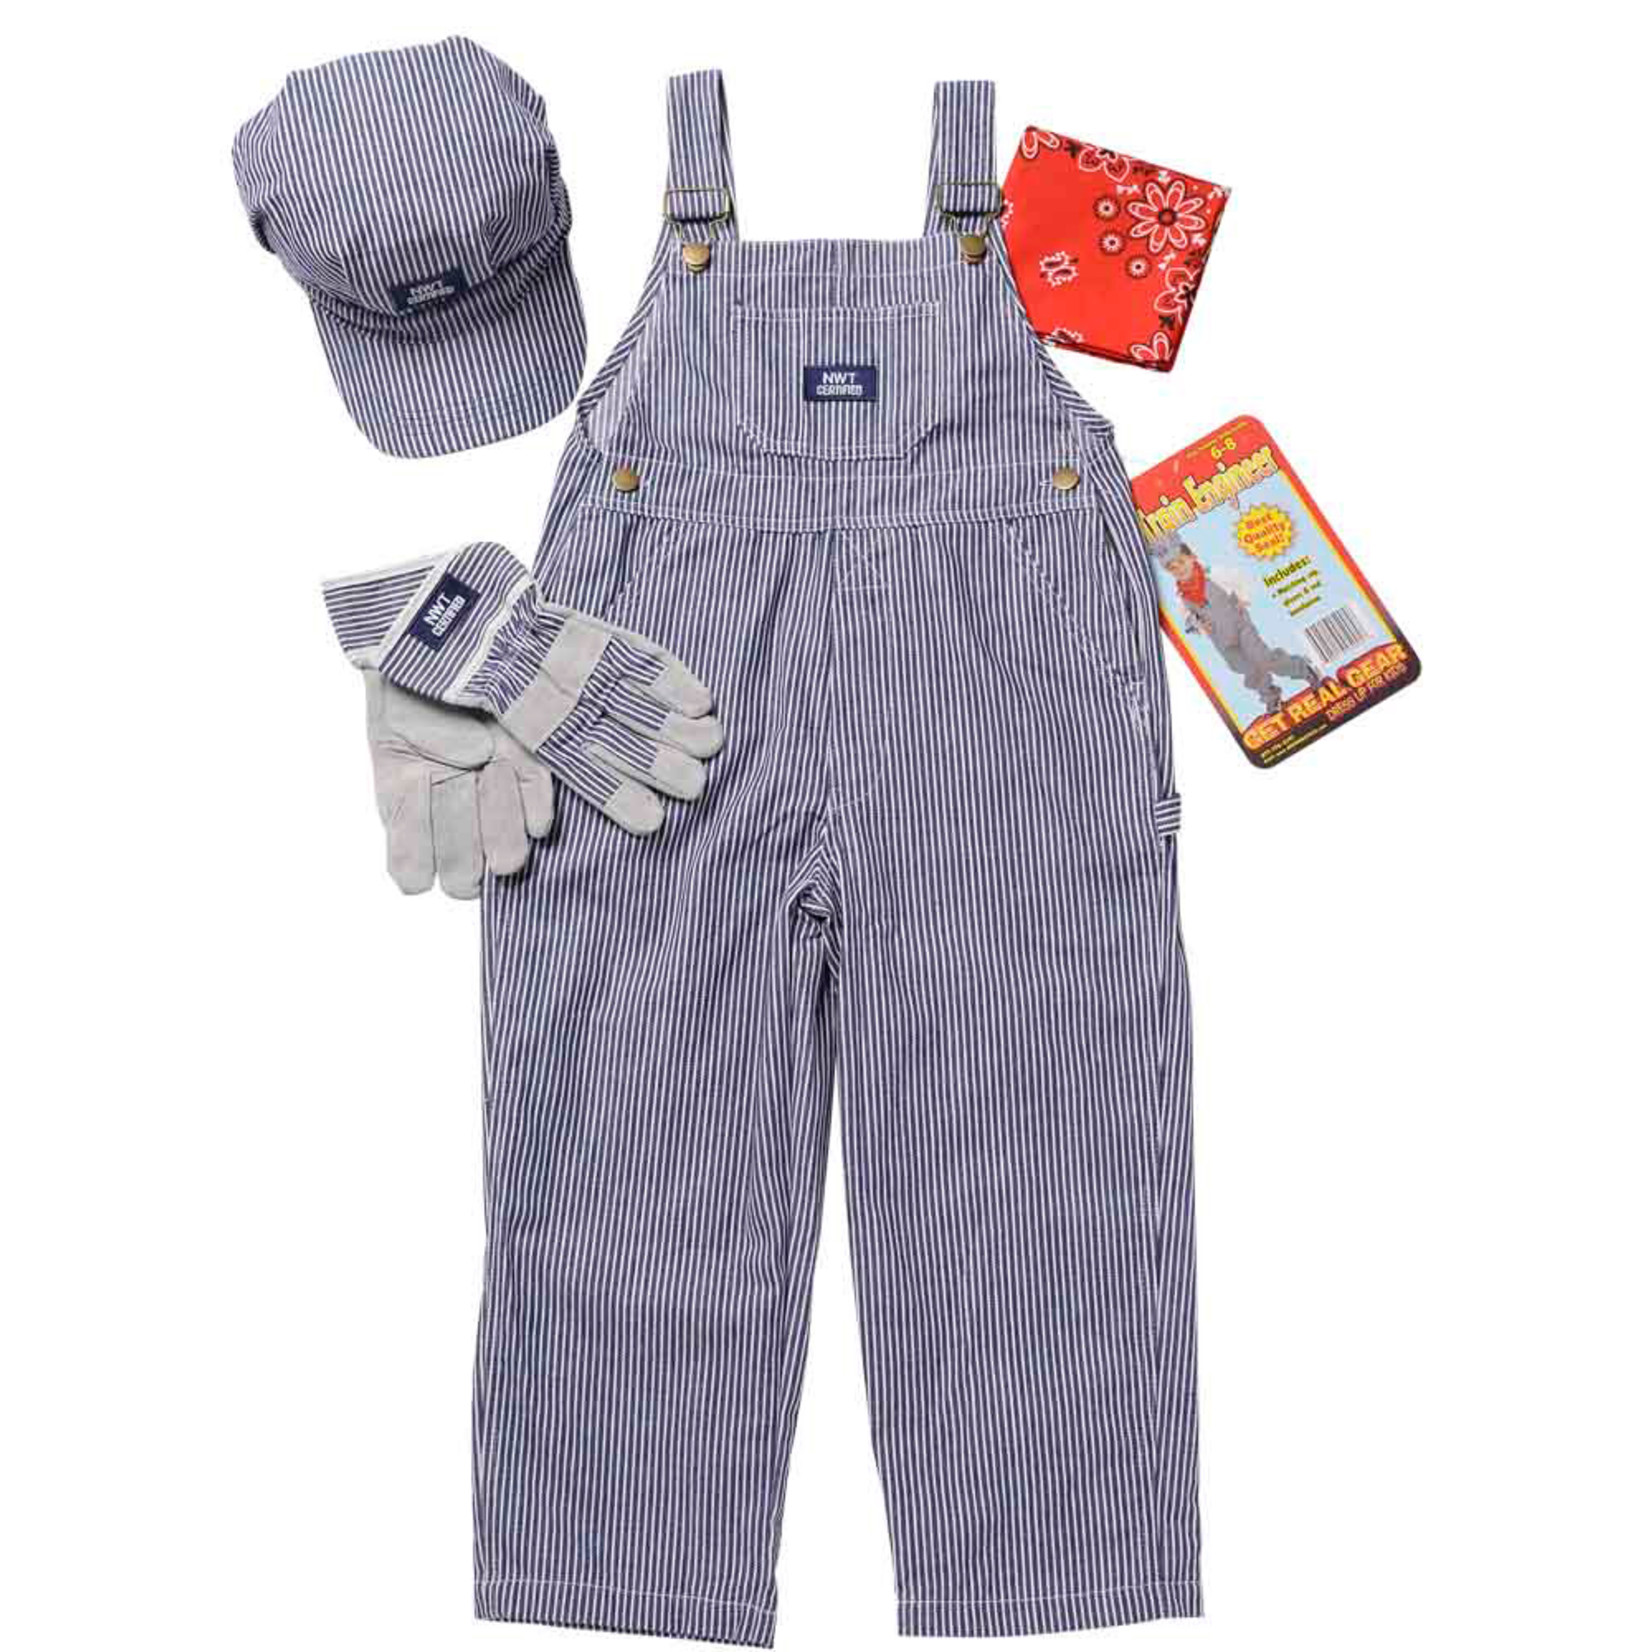 Science and Technology Children's Engineer Suit